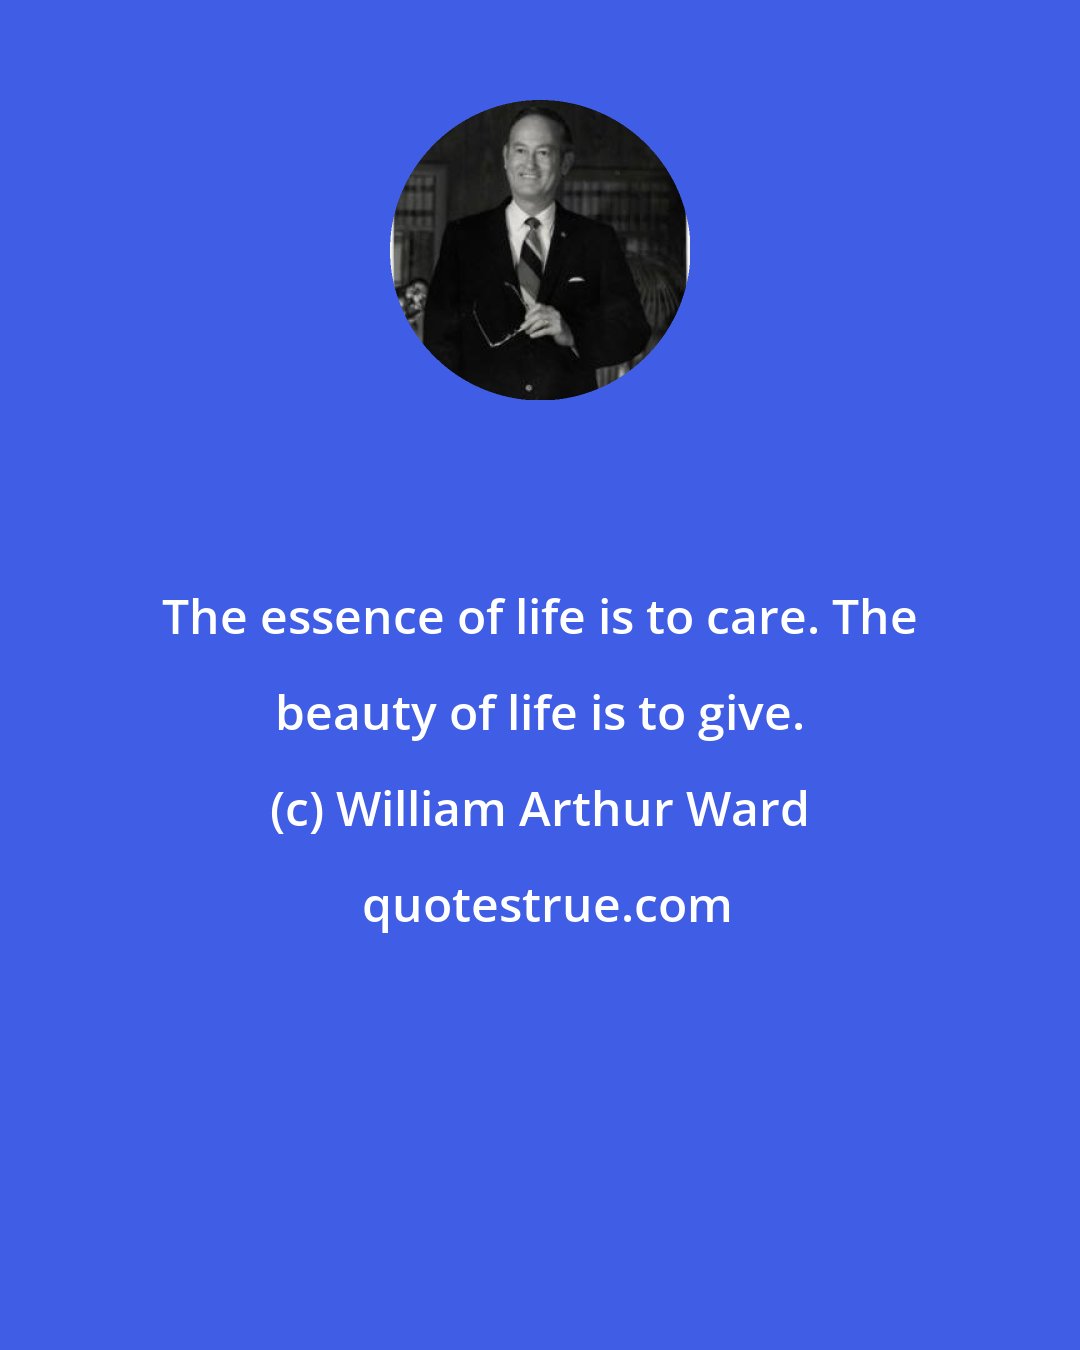 William Arthur Ward: The essence of life is to care. The beauty of life is to give.